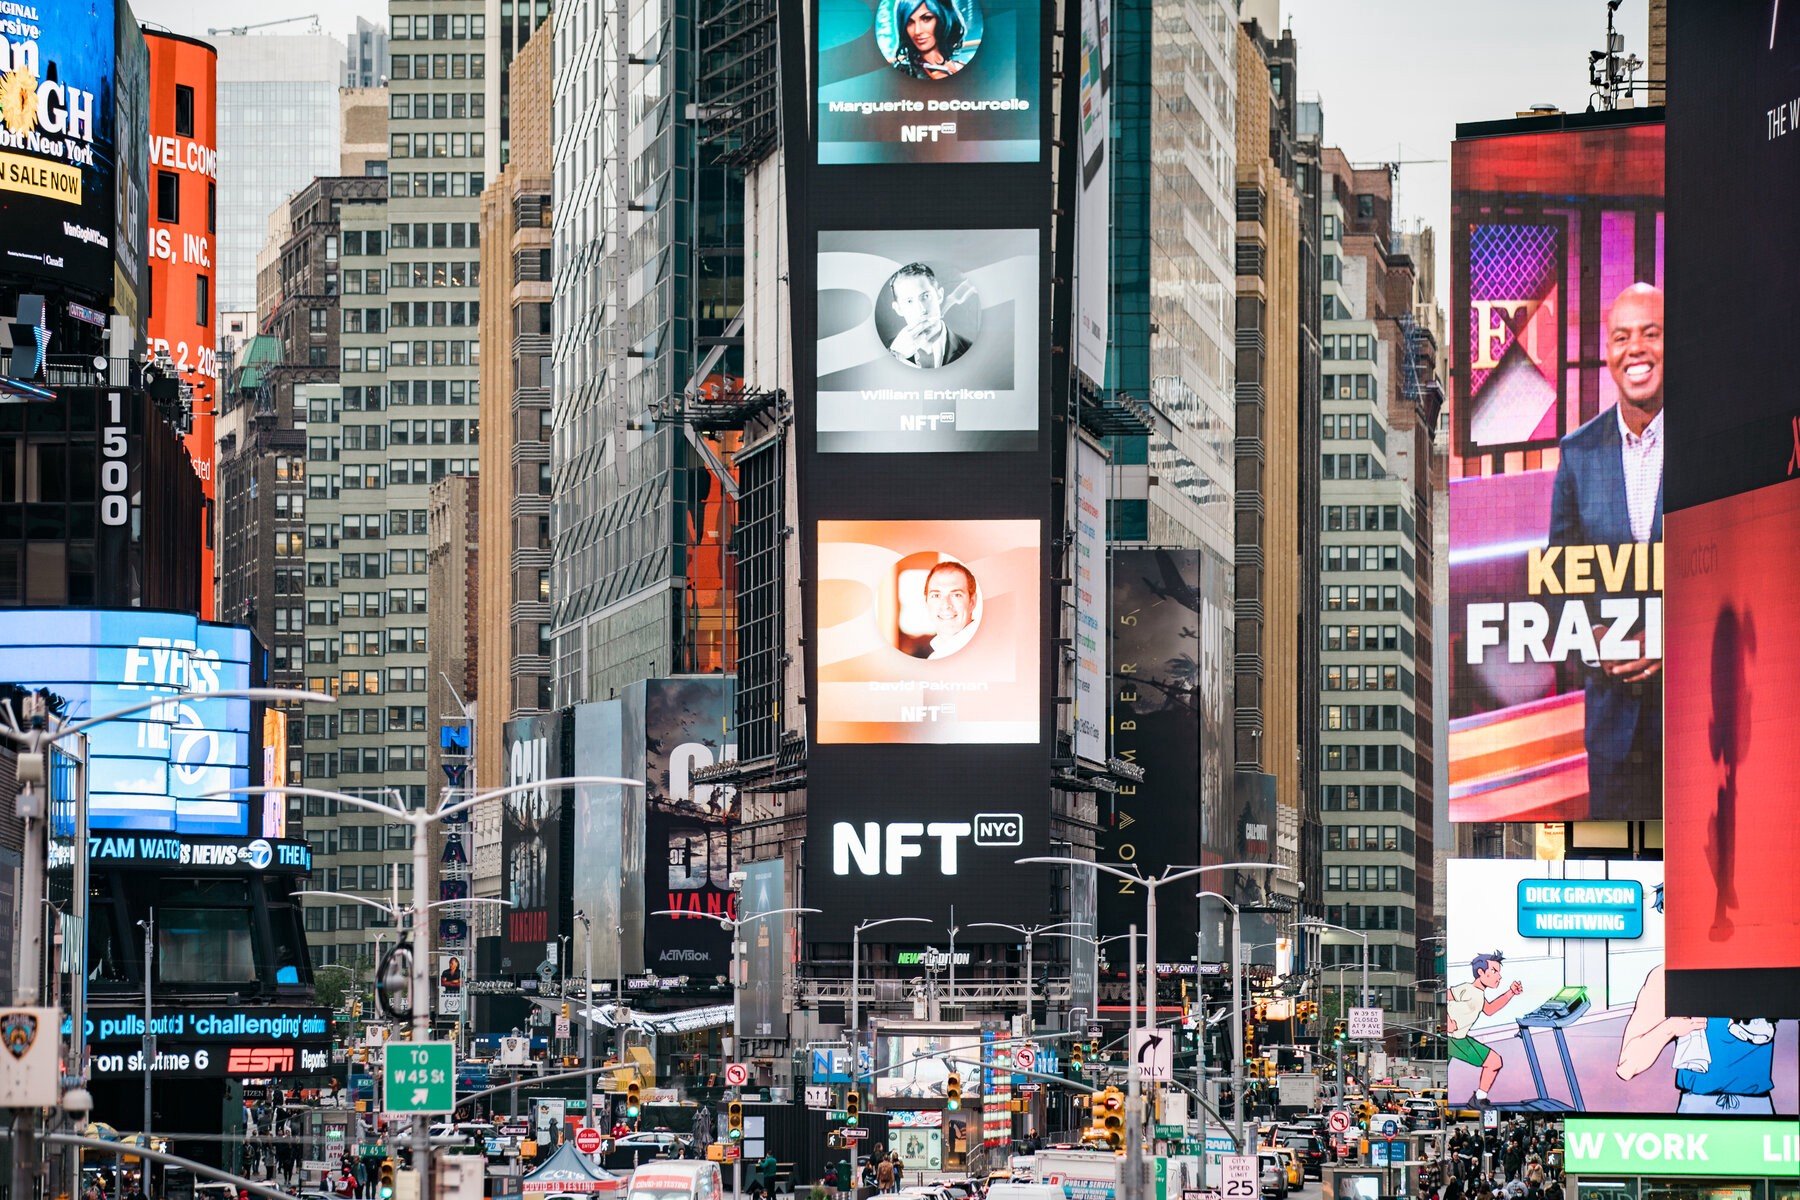 Times Square billboards including one for NFT.NYC